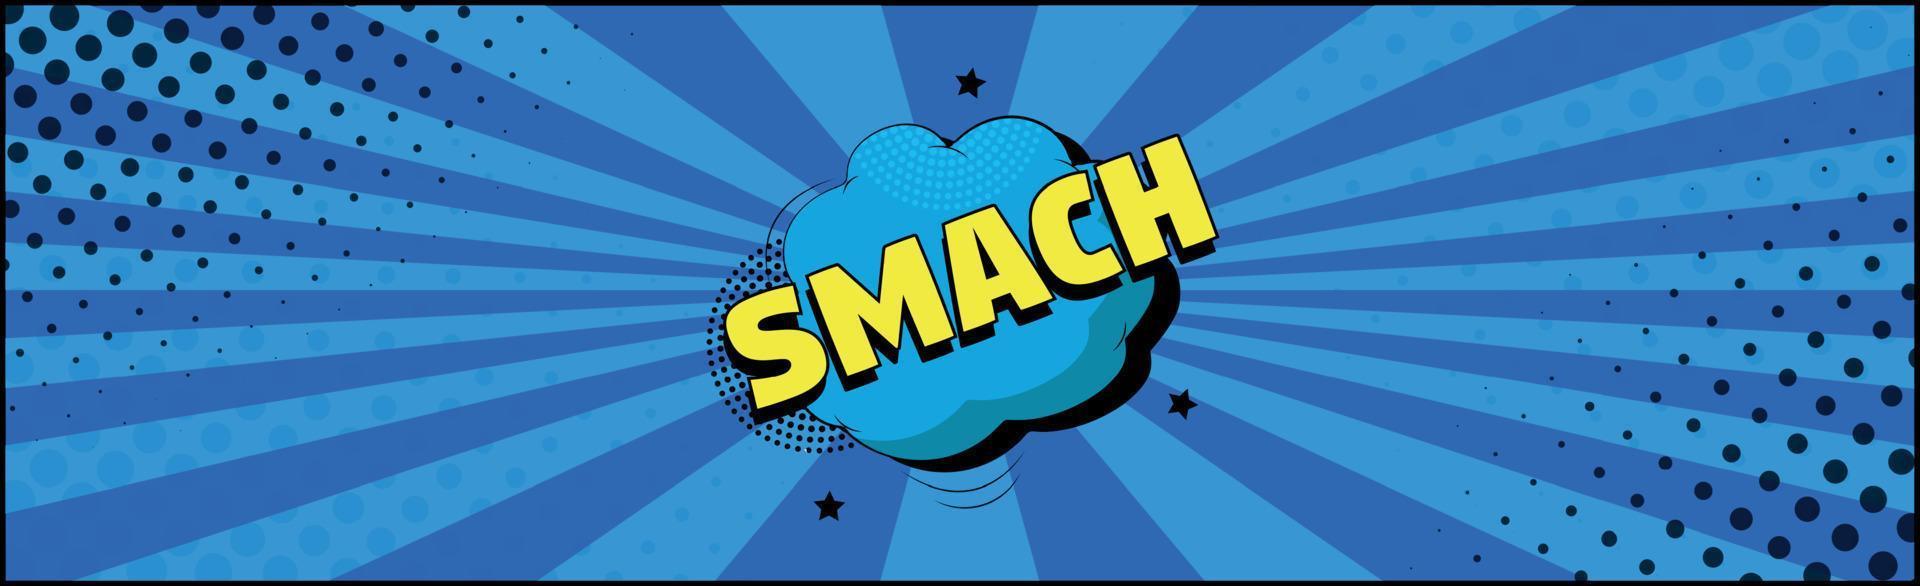 Comic zoom inscription SMACH on a colored background - Vector